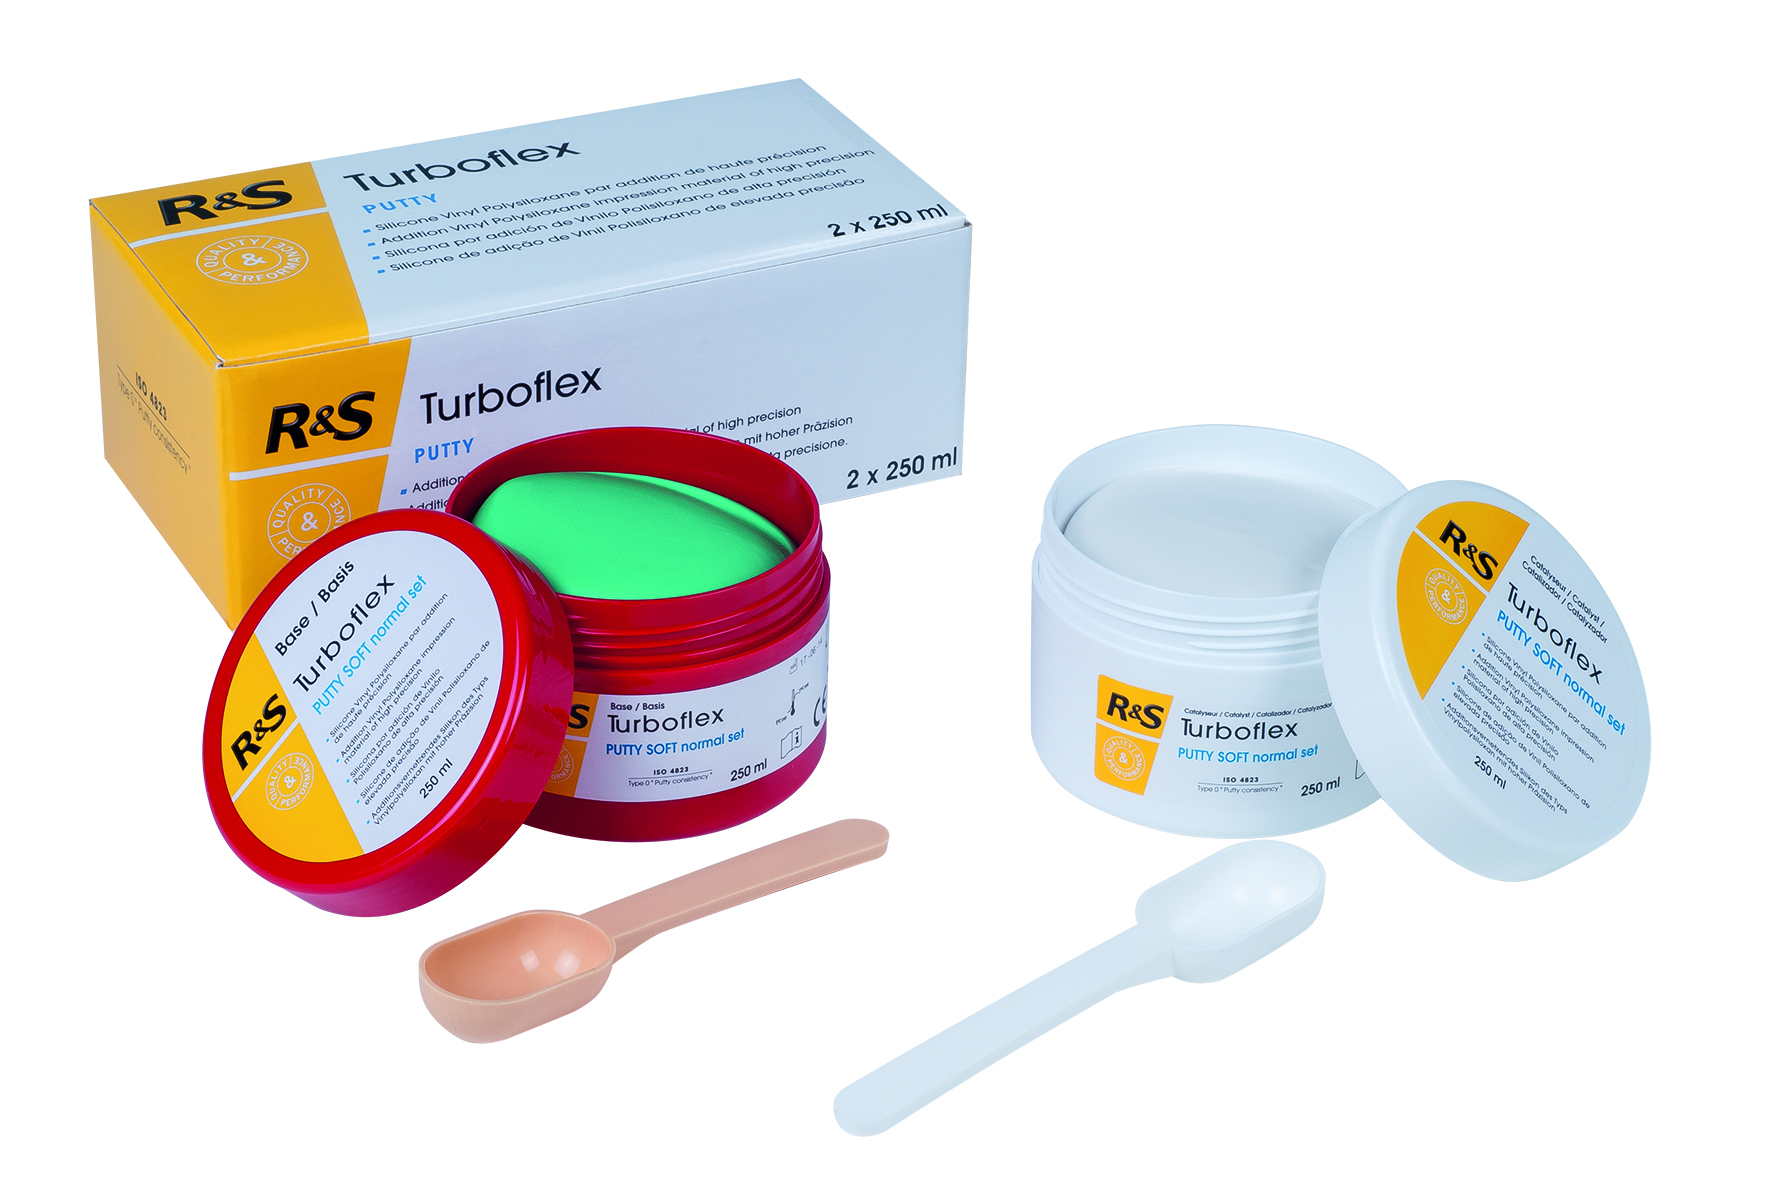 AP Dental Silicone two components putty